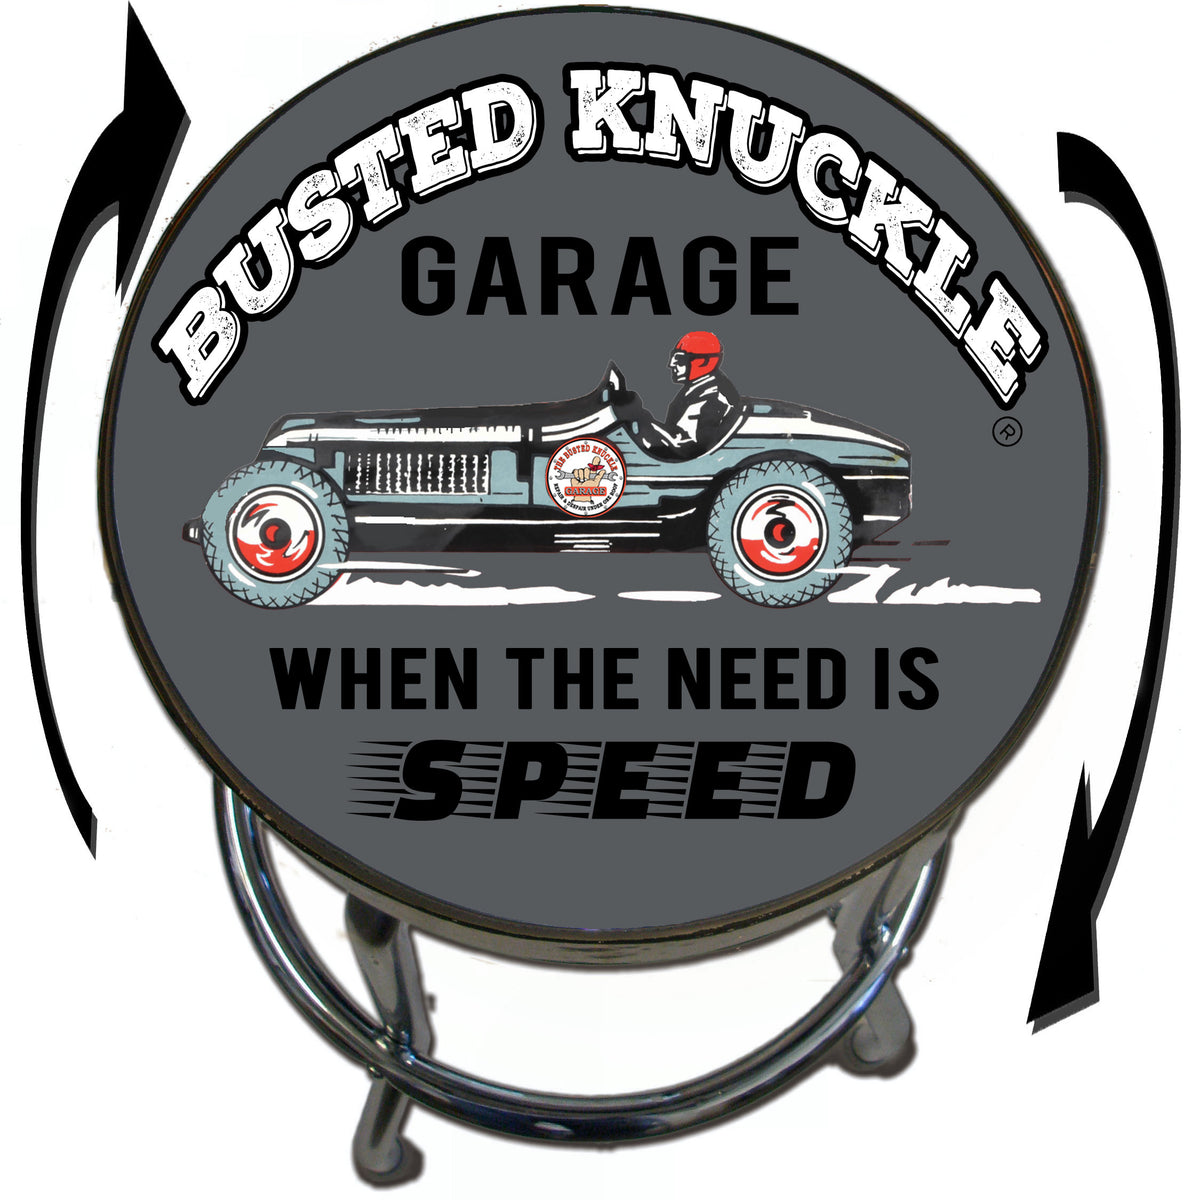 Busted Knuckle Garage Speed Shop Stool